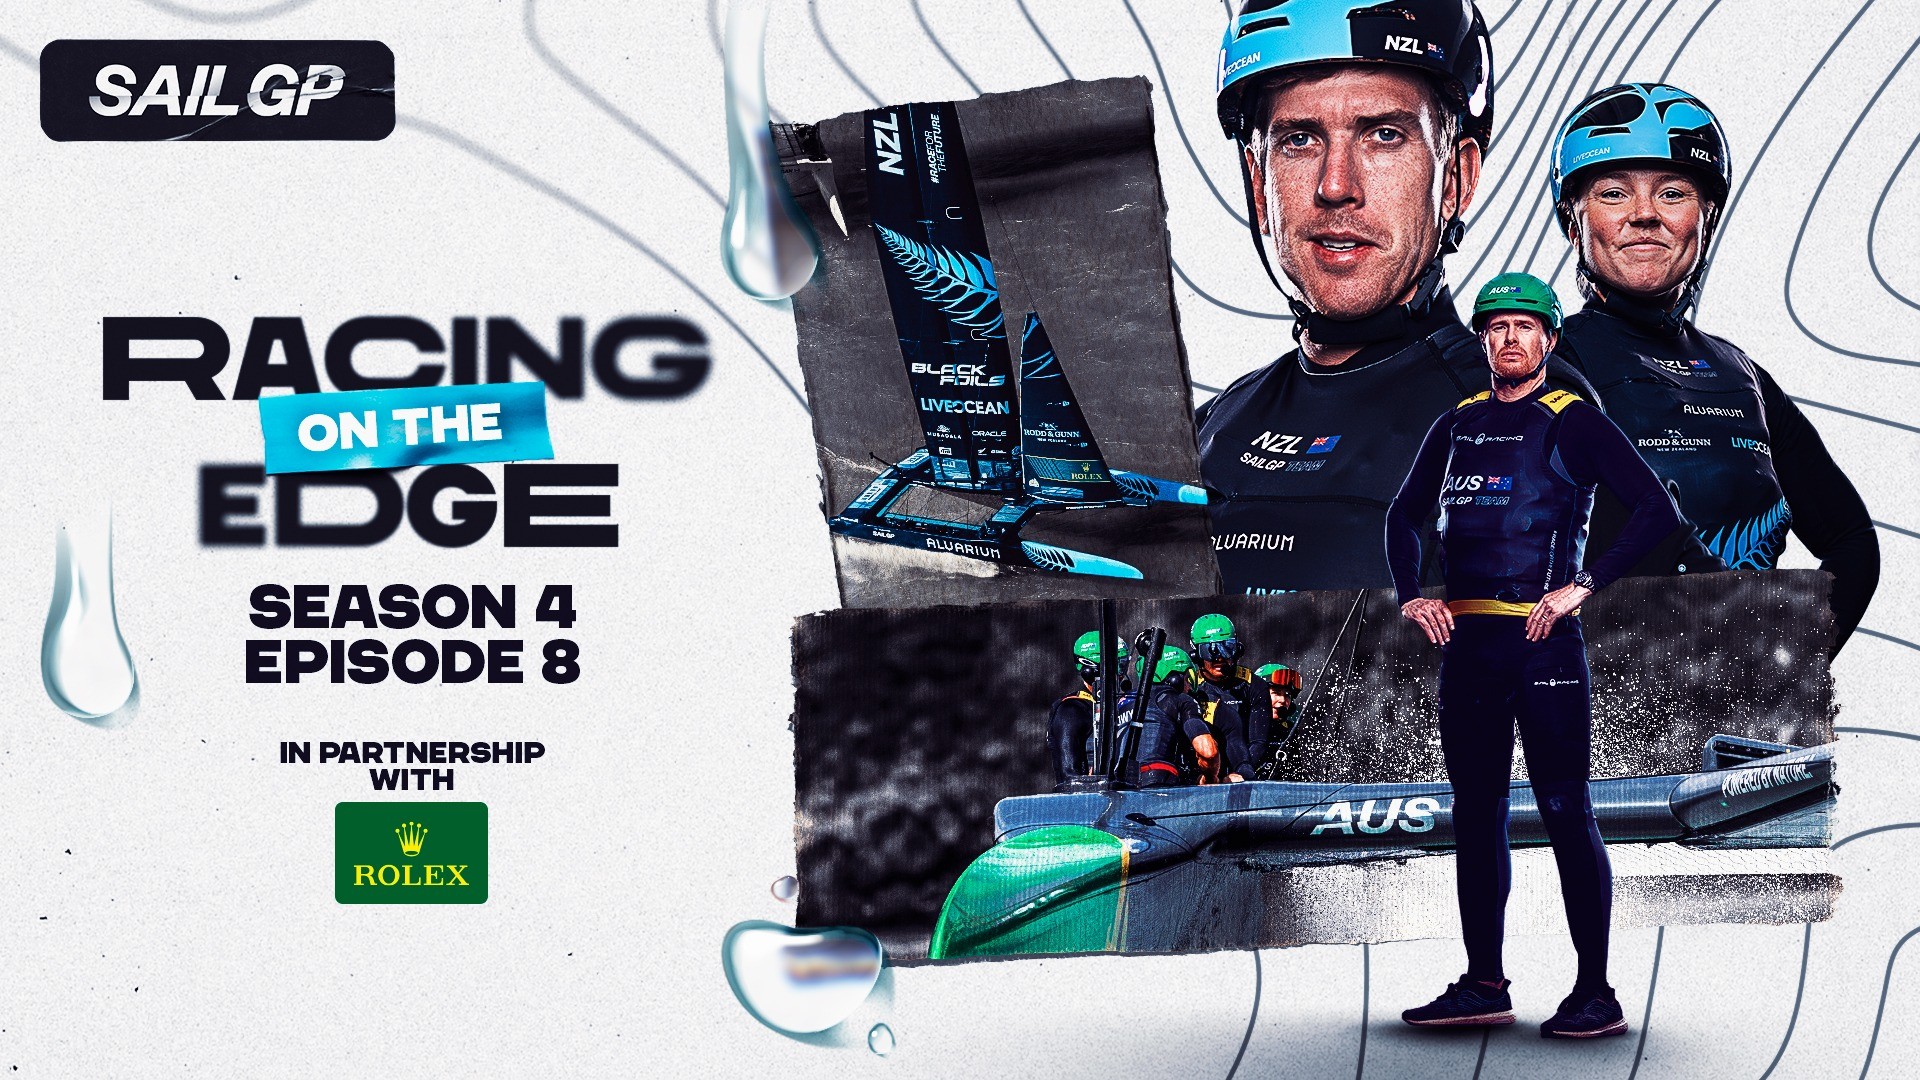 Big crashes and all of the drama from the ITM New Zealand Sail Grand Prix revealed in the latest episode of Racing on the Edge